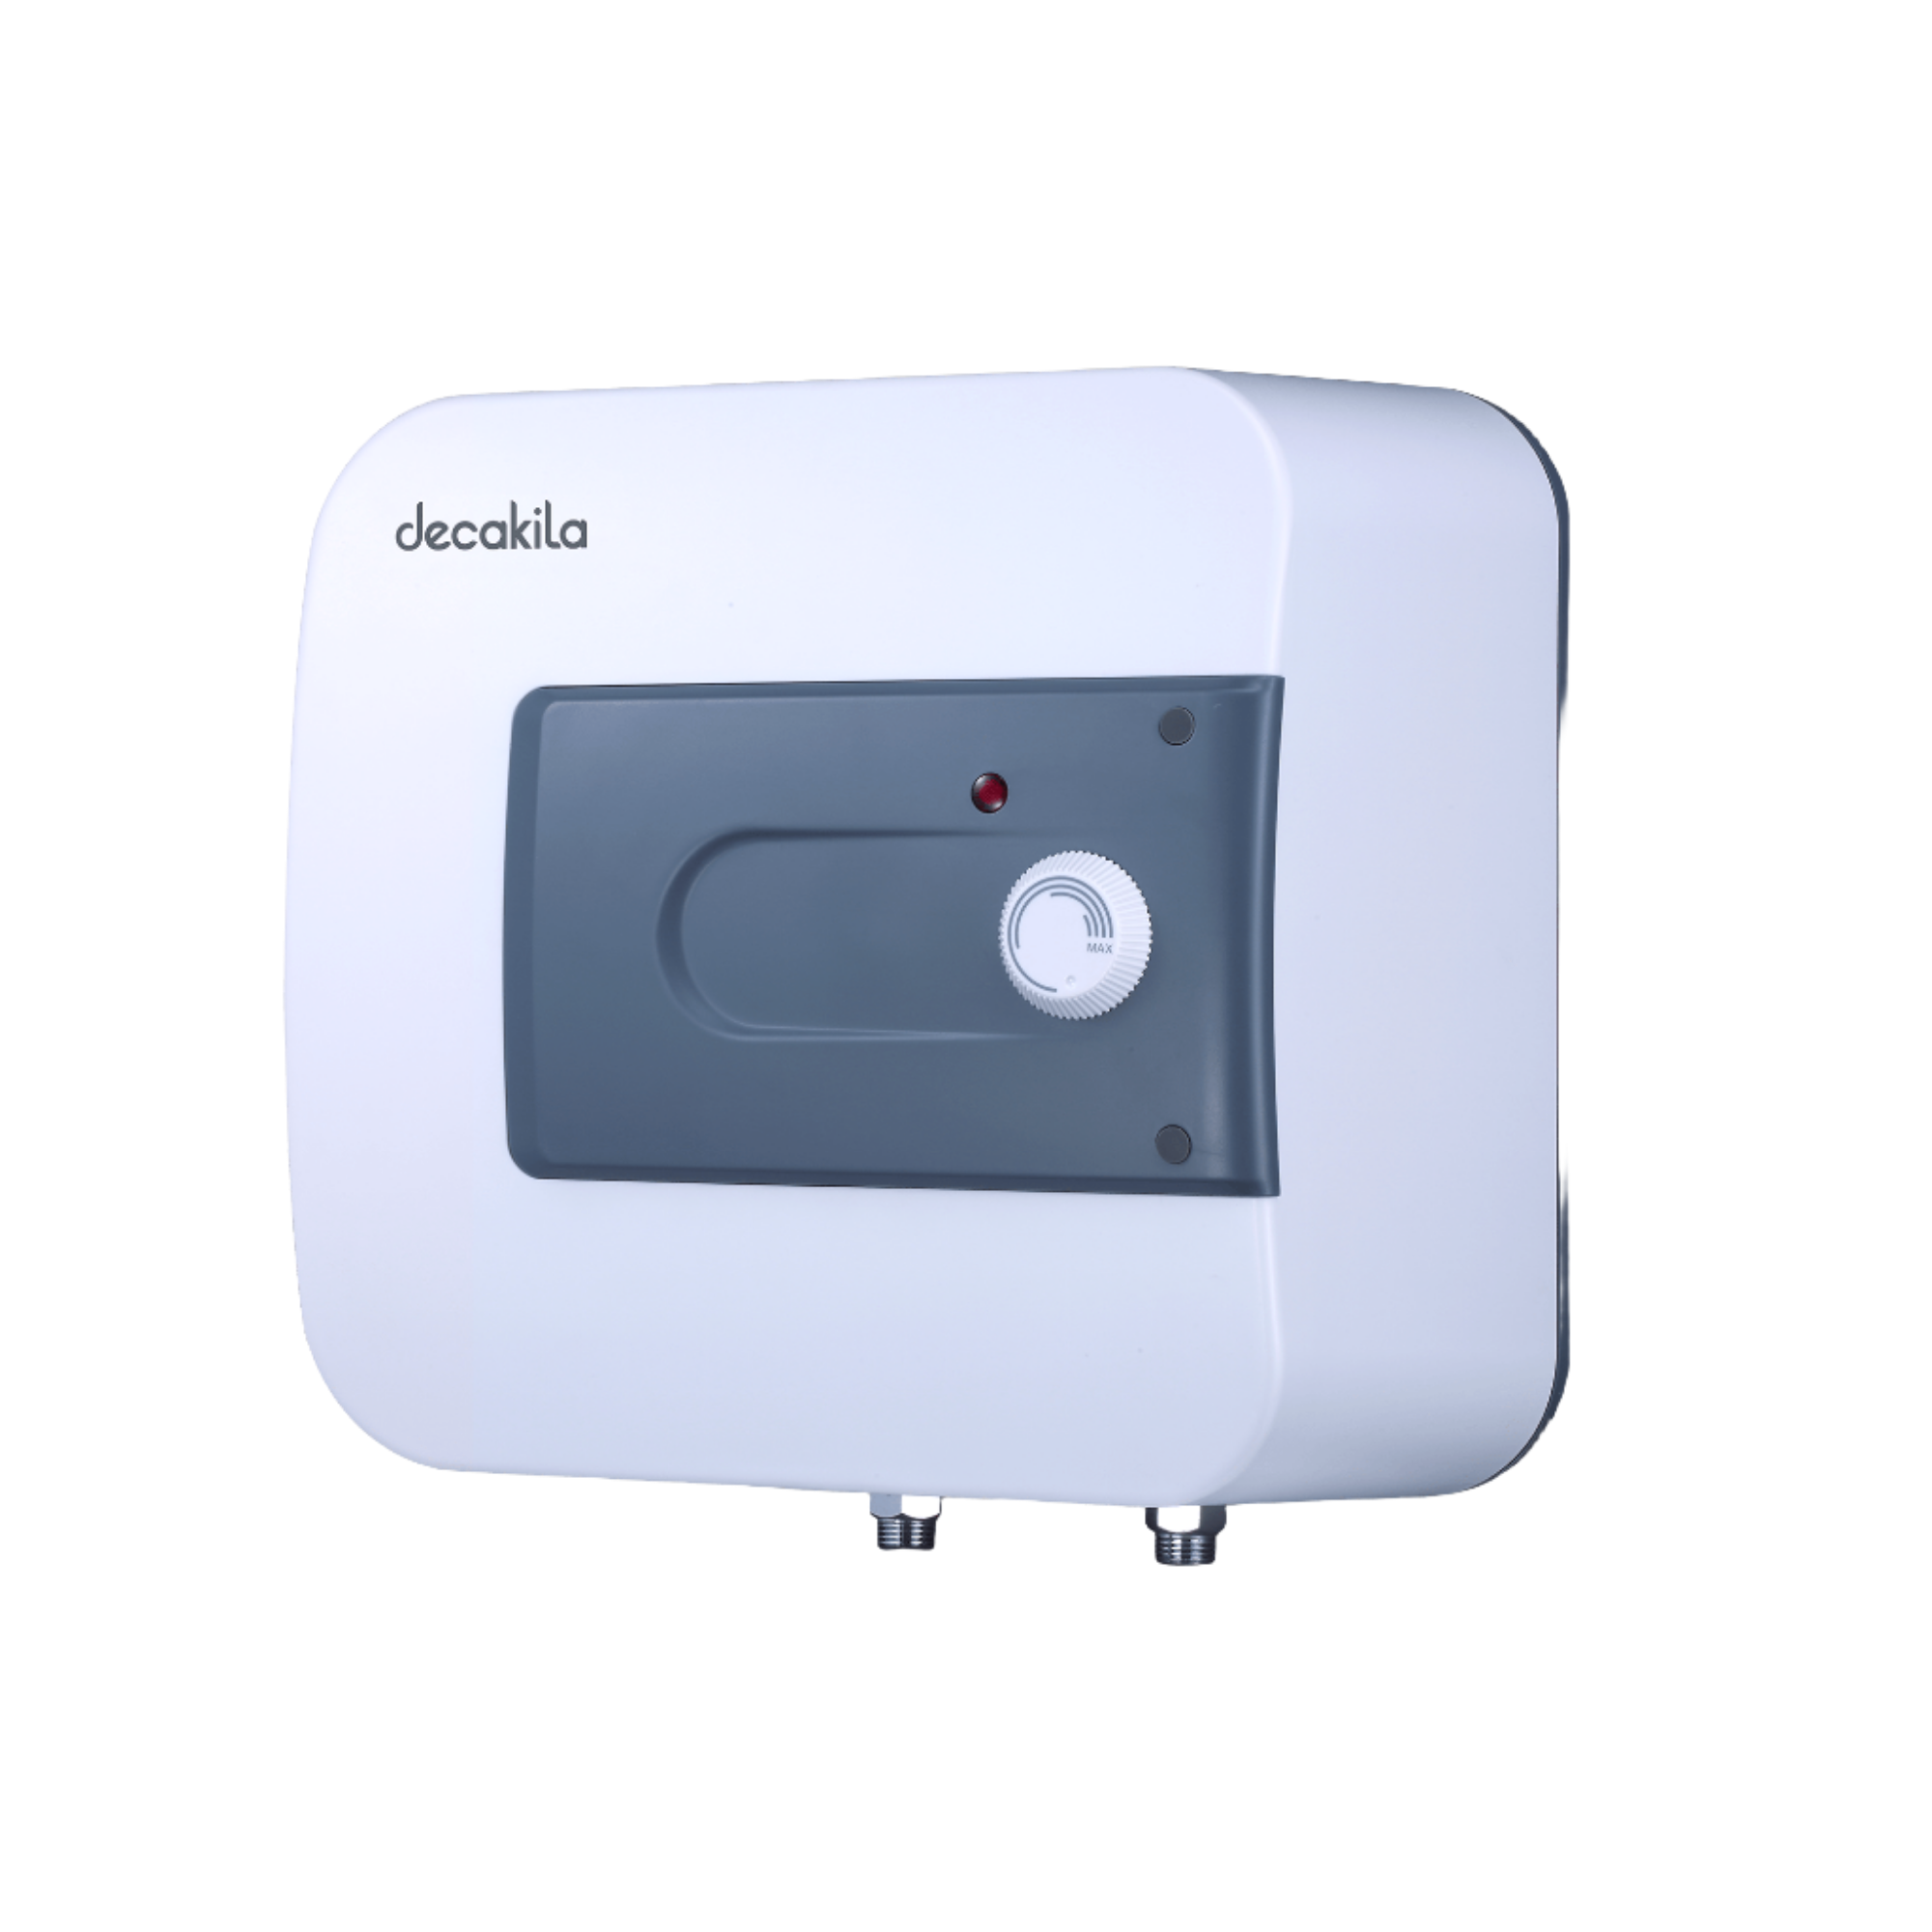 Decakila 15L Electric Water Heater 1500W - KEWH006W | Buy Online in Accra, Ghana - Supply Master Water Heater Buy Tools hardware Building materials